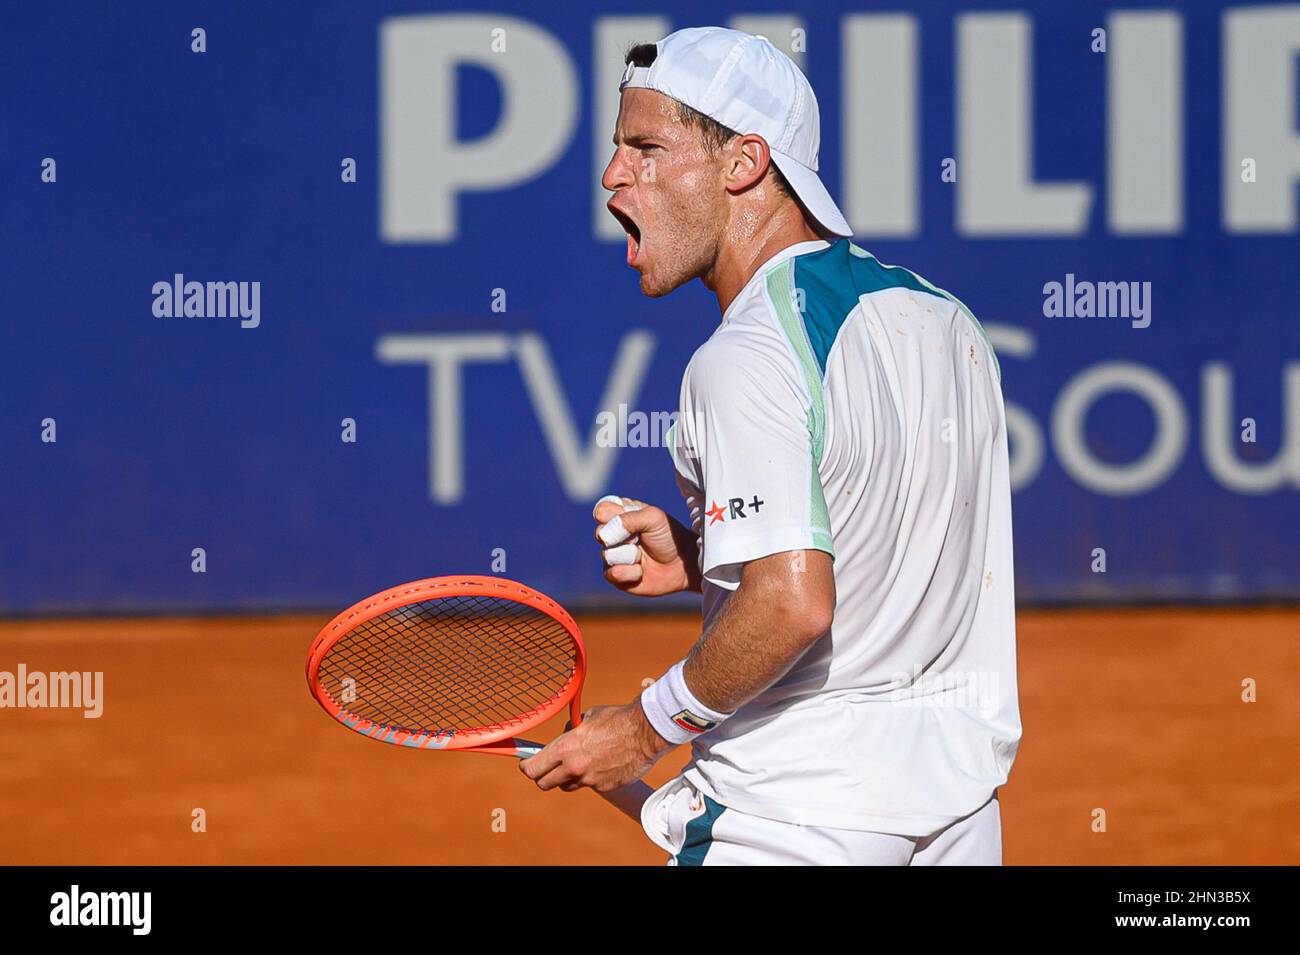 Buenos Aires, Argentina. 13th Feb, 2022. Diego Schwartzman of Argentina  celebrates after winning point during the Men's Singles Final match against  Casper Ruud of Norway at Buenos Aires Lawn Tennis Club. (Final